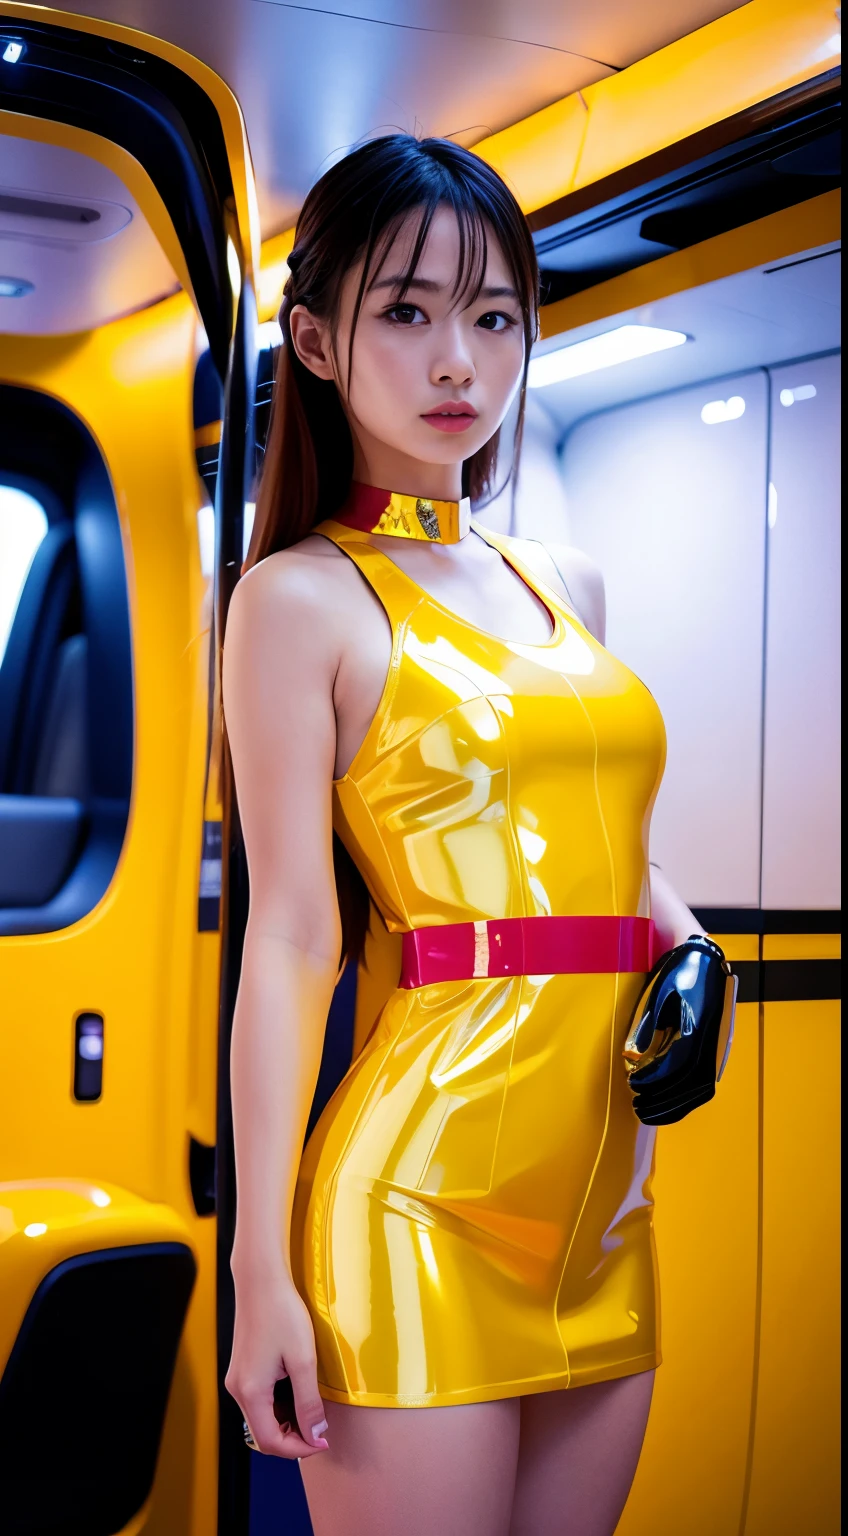 rialistic photo、Fa Yuili、An 18-year-old woman in a yellow dress posing inside a spaceship,White panty、 wearing atsuko kudo latex outfit, faye valentine, faye valentine from cowboy bebop, yellow space suit, latex dress, Glossy yellow, taken in 2 0 2 0, as a retro futuristic heroine, trending at cgstation, latex shiny, cyberpunk glossy latex suit, star trek asian woman, shiny gold